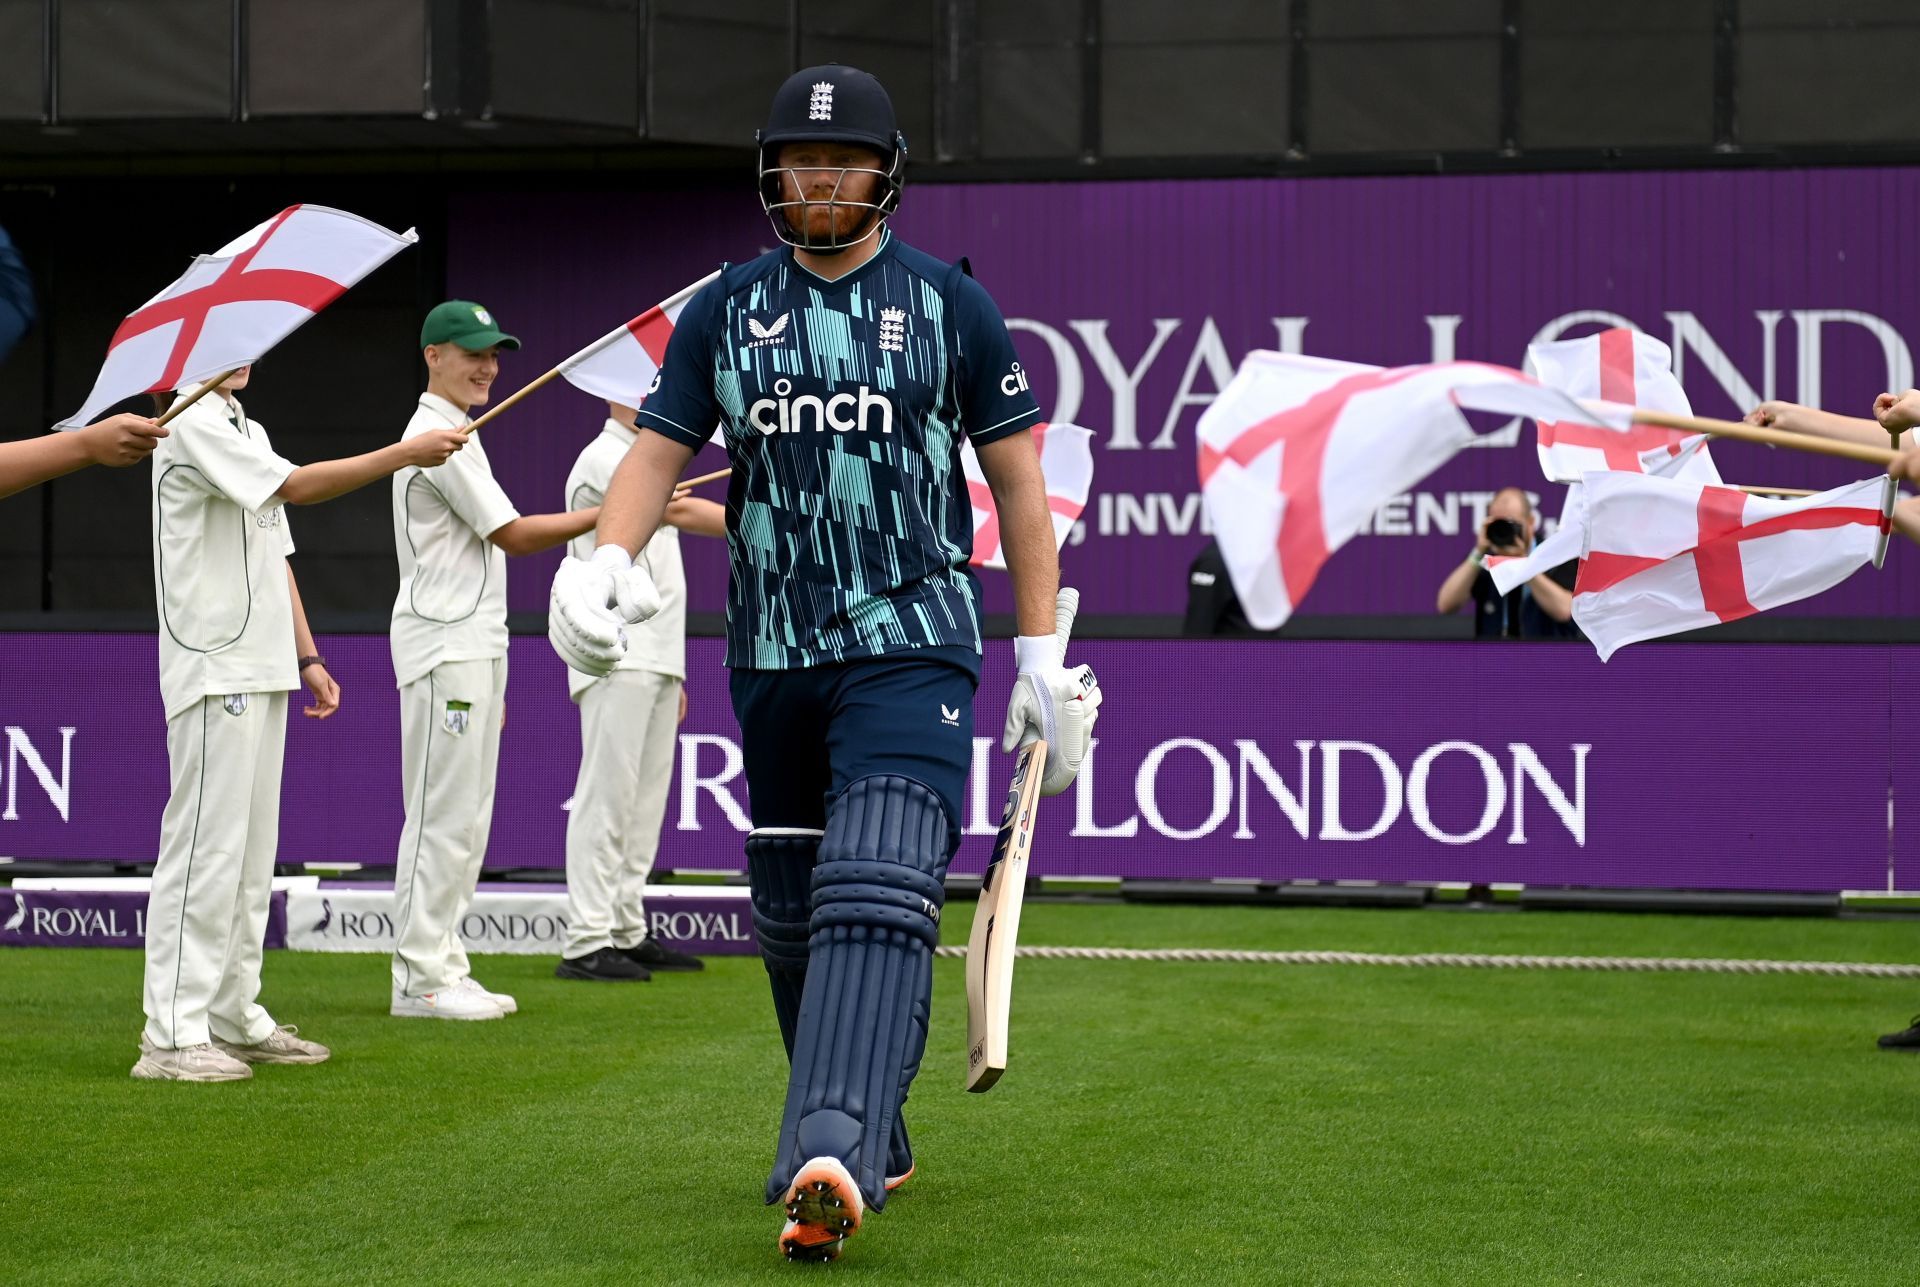 Jonny Bairstow eager to play all forms of cricket. (Credits: Getty)